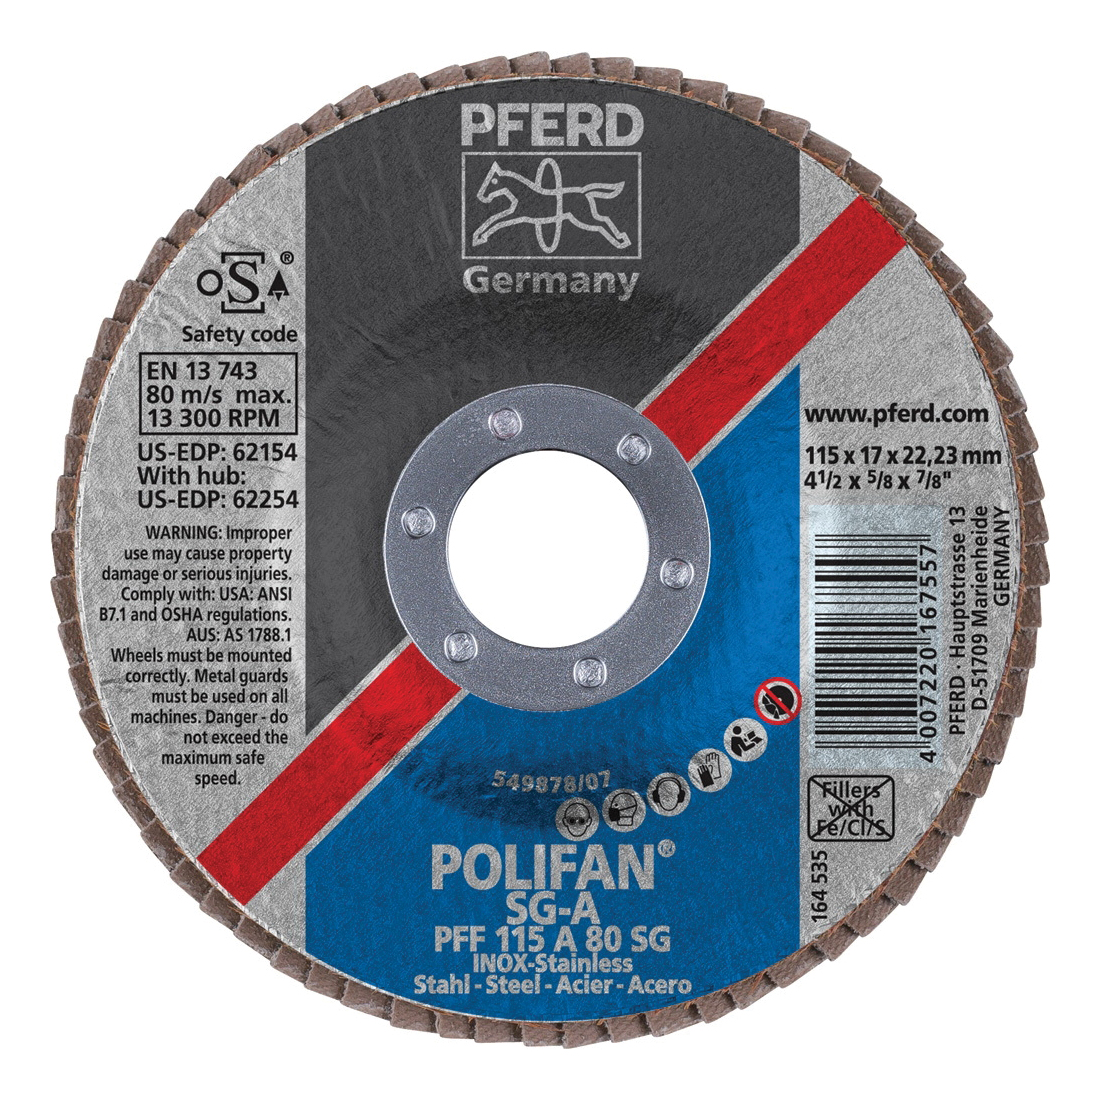 PFERD Polifan® 62154 Performance Line SG A Unthreaded Coated Abrasive Flap Disc, 4-1/2 in Dia, 7/8 in Center Hole, 80 Grit, Aluminum Oxide Abrasive, Type 27 Flat Disc